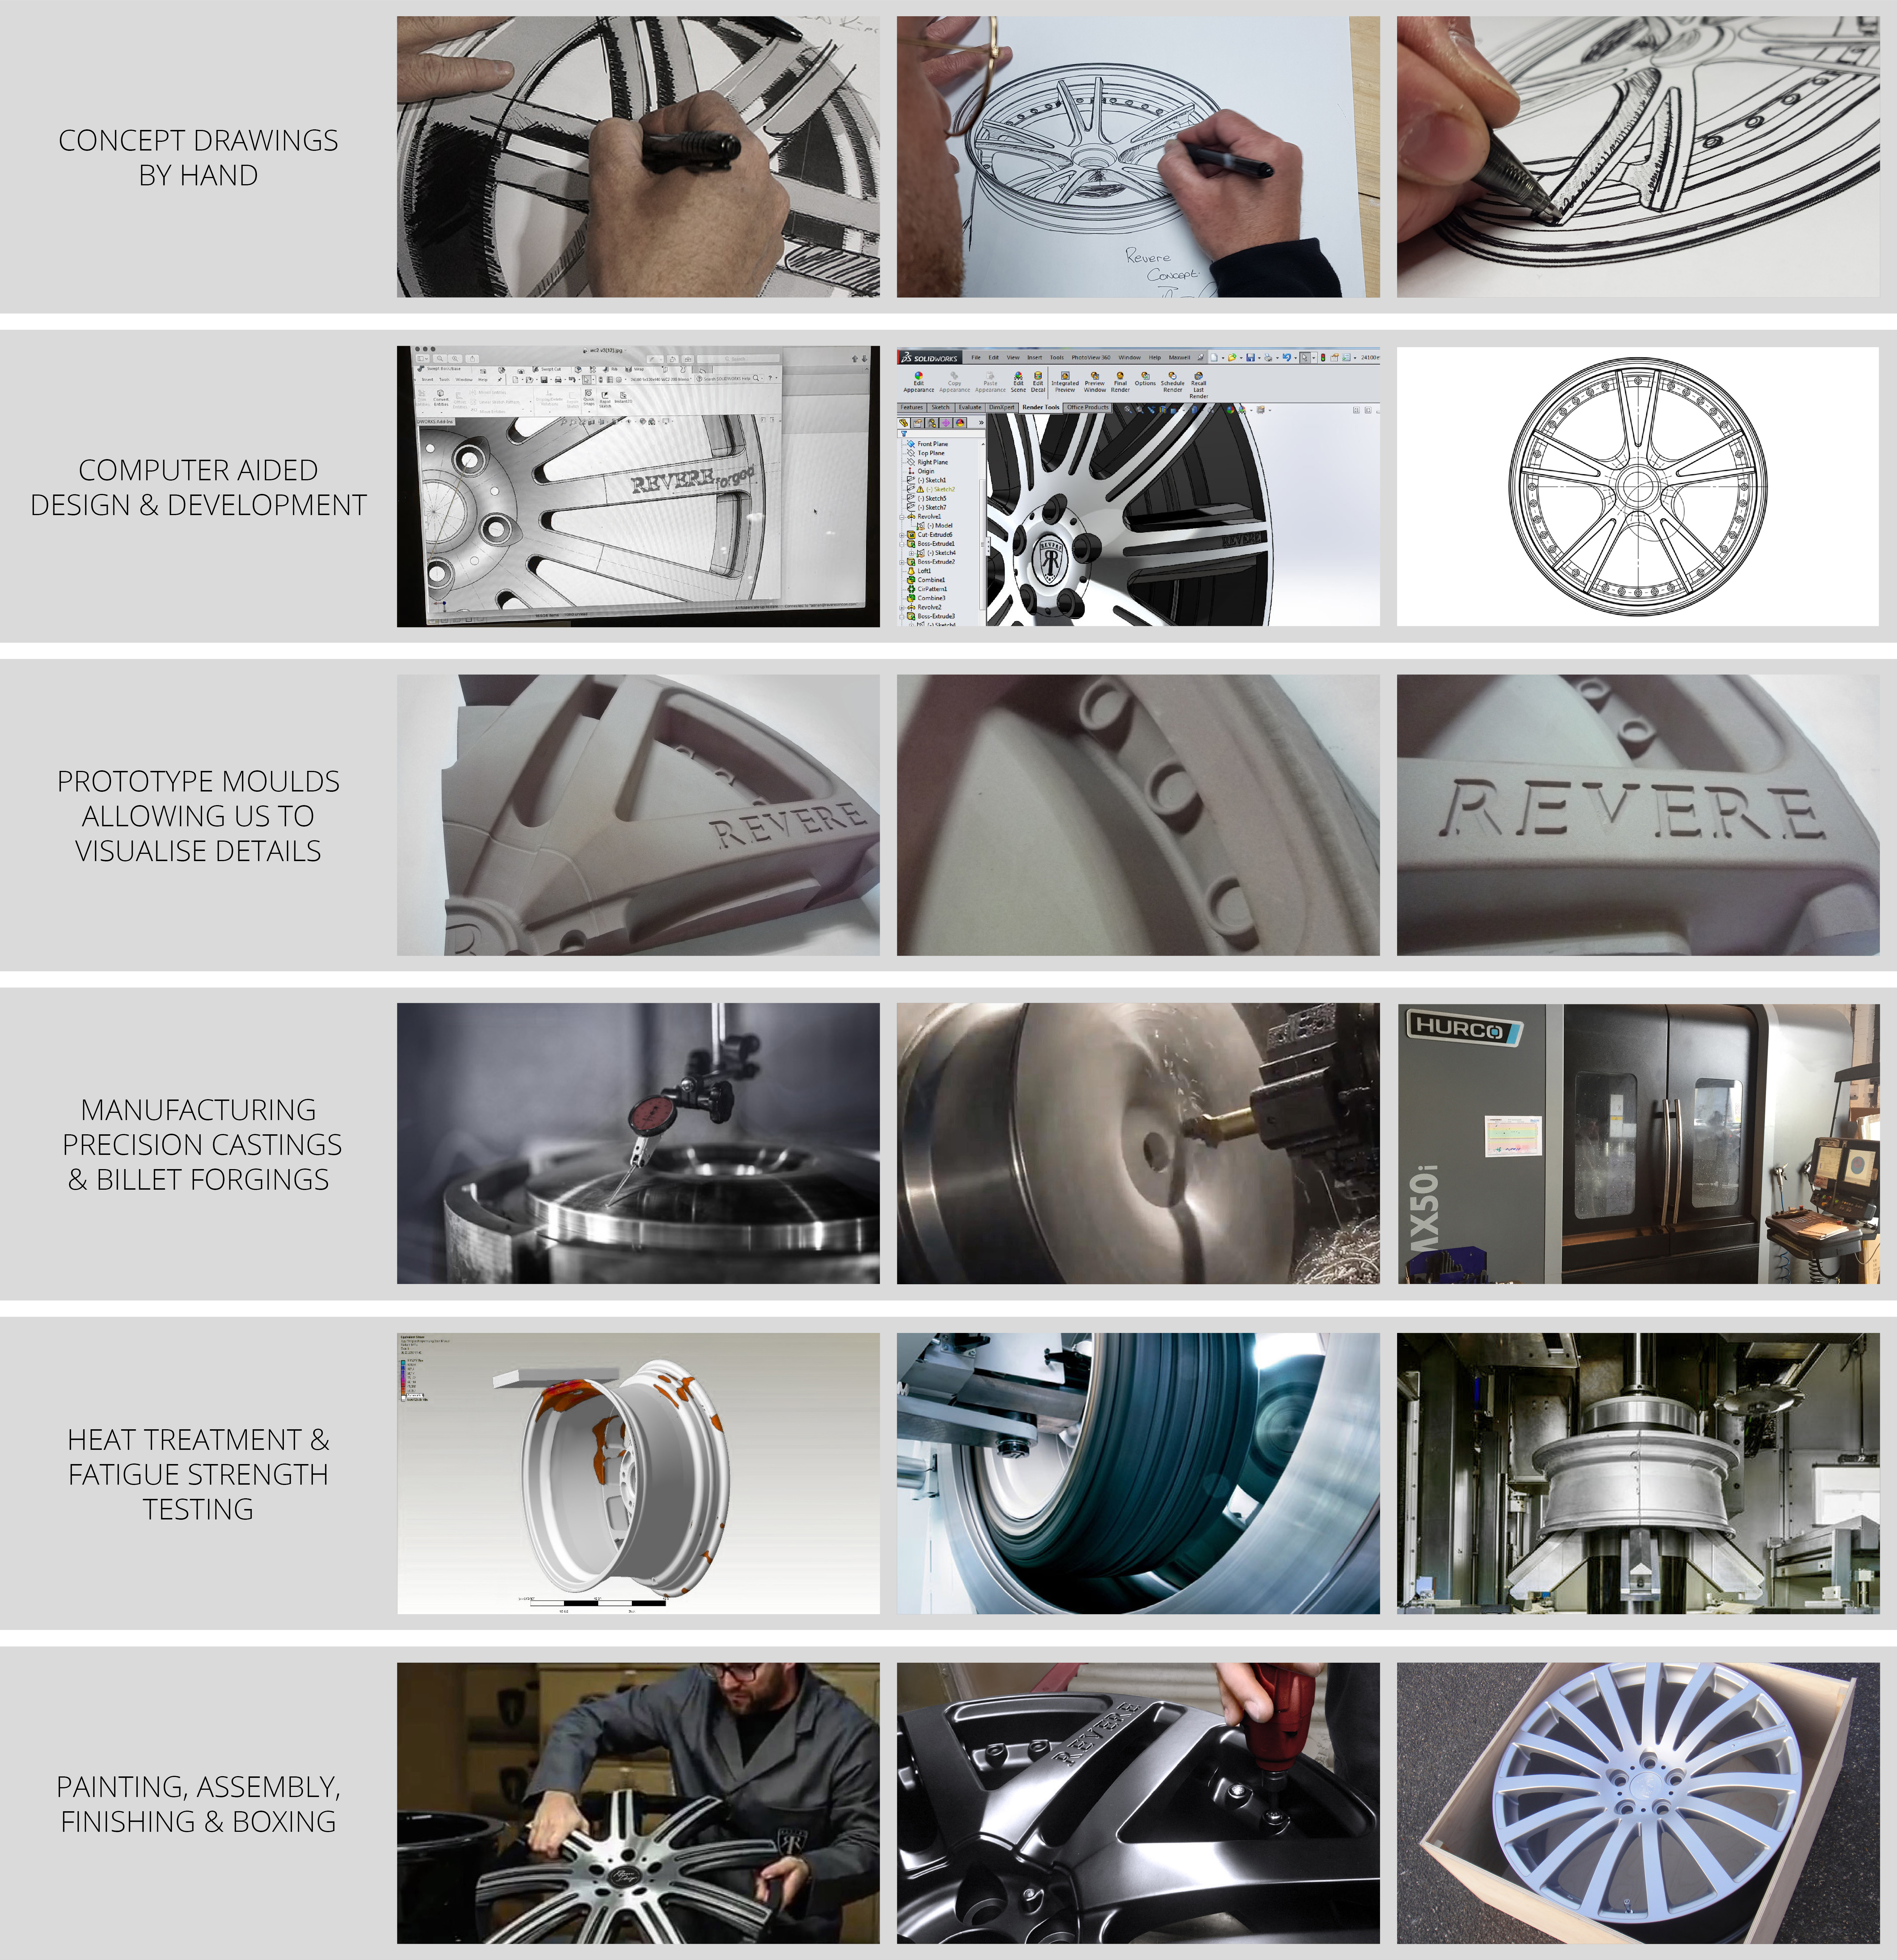 Wheel design and manufacturing